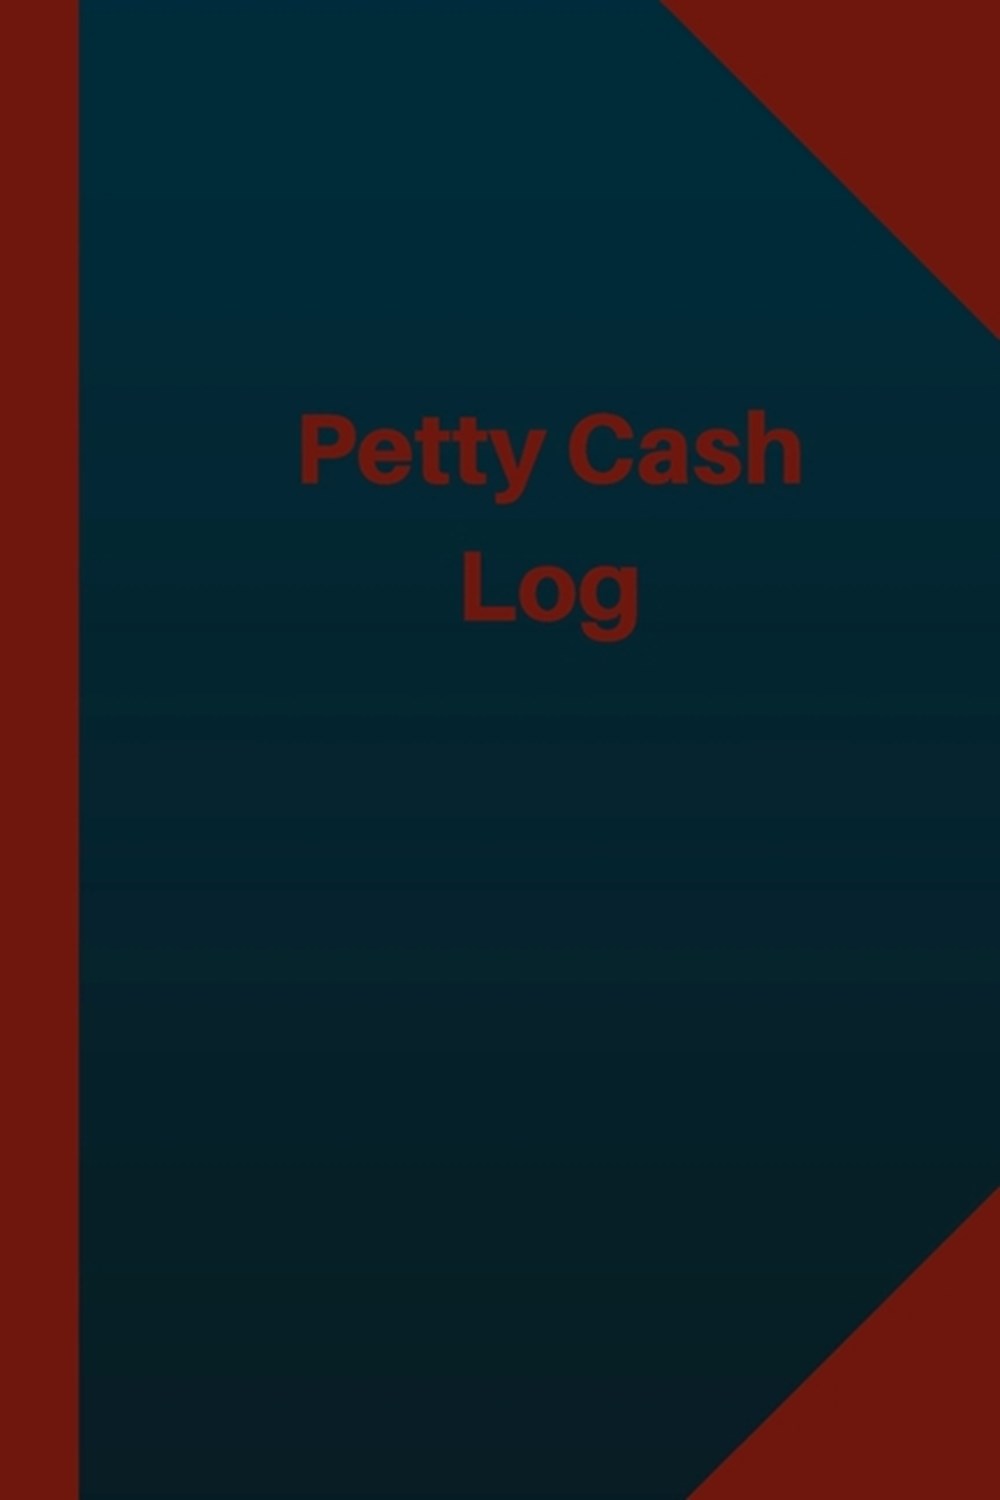 Petty Cash Log (Logbook, Journal - 124 pages 6x9 inches) Petty Cash Logbook (Blue Cover, Medium)